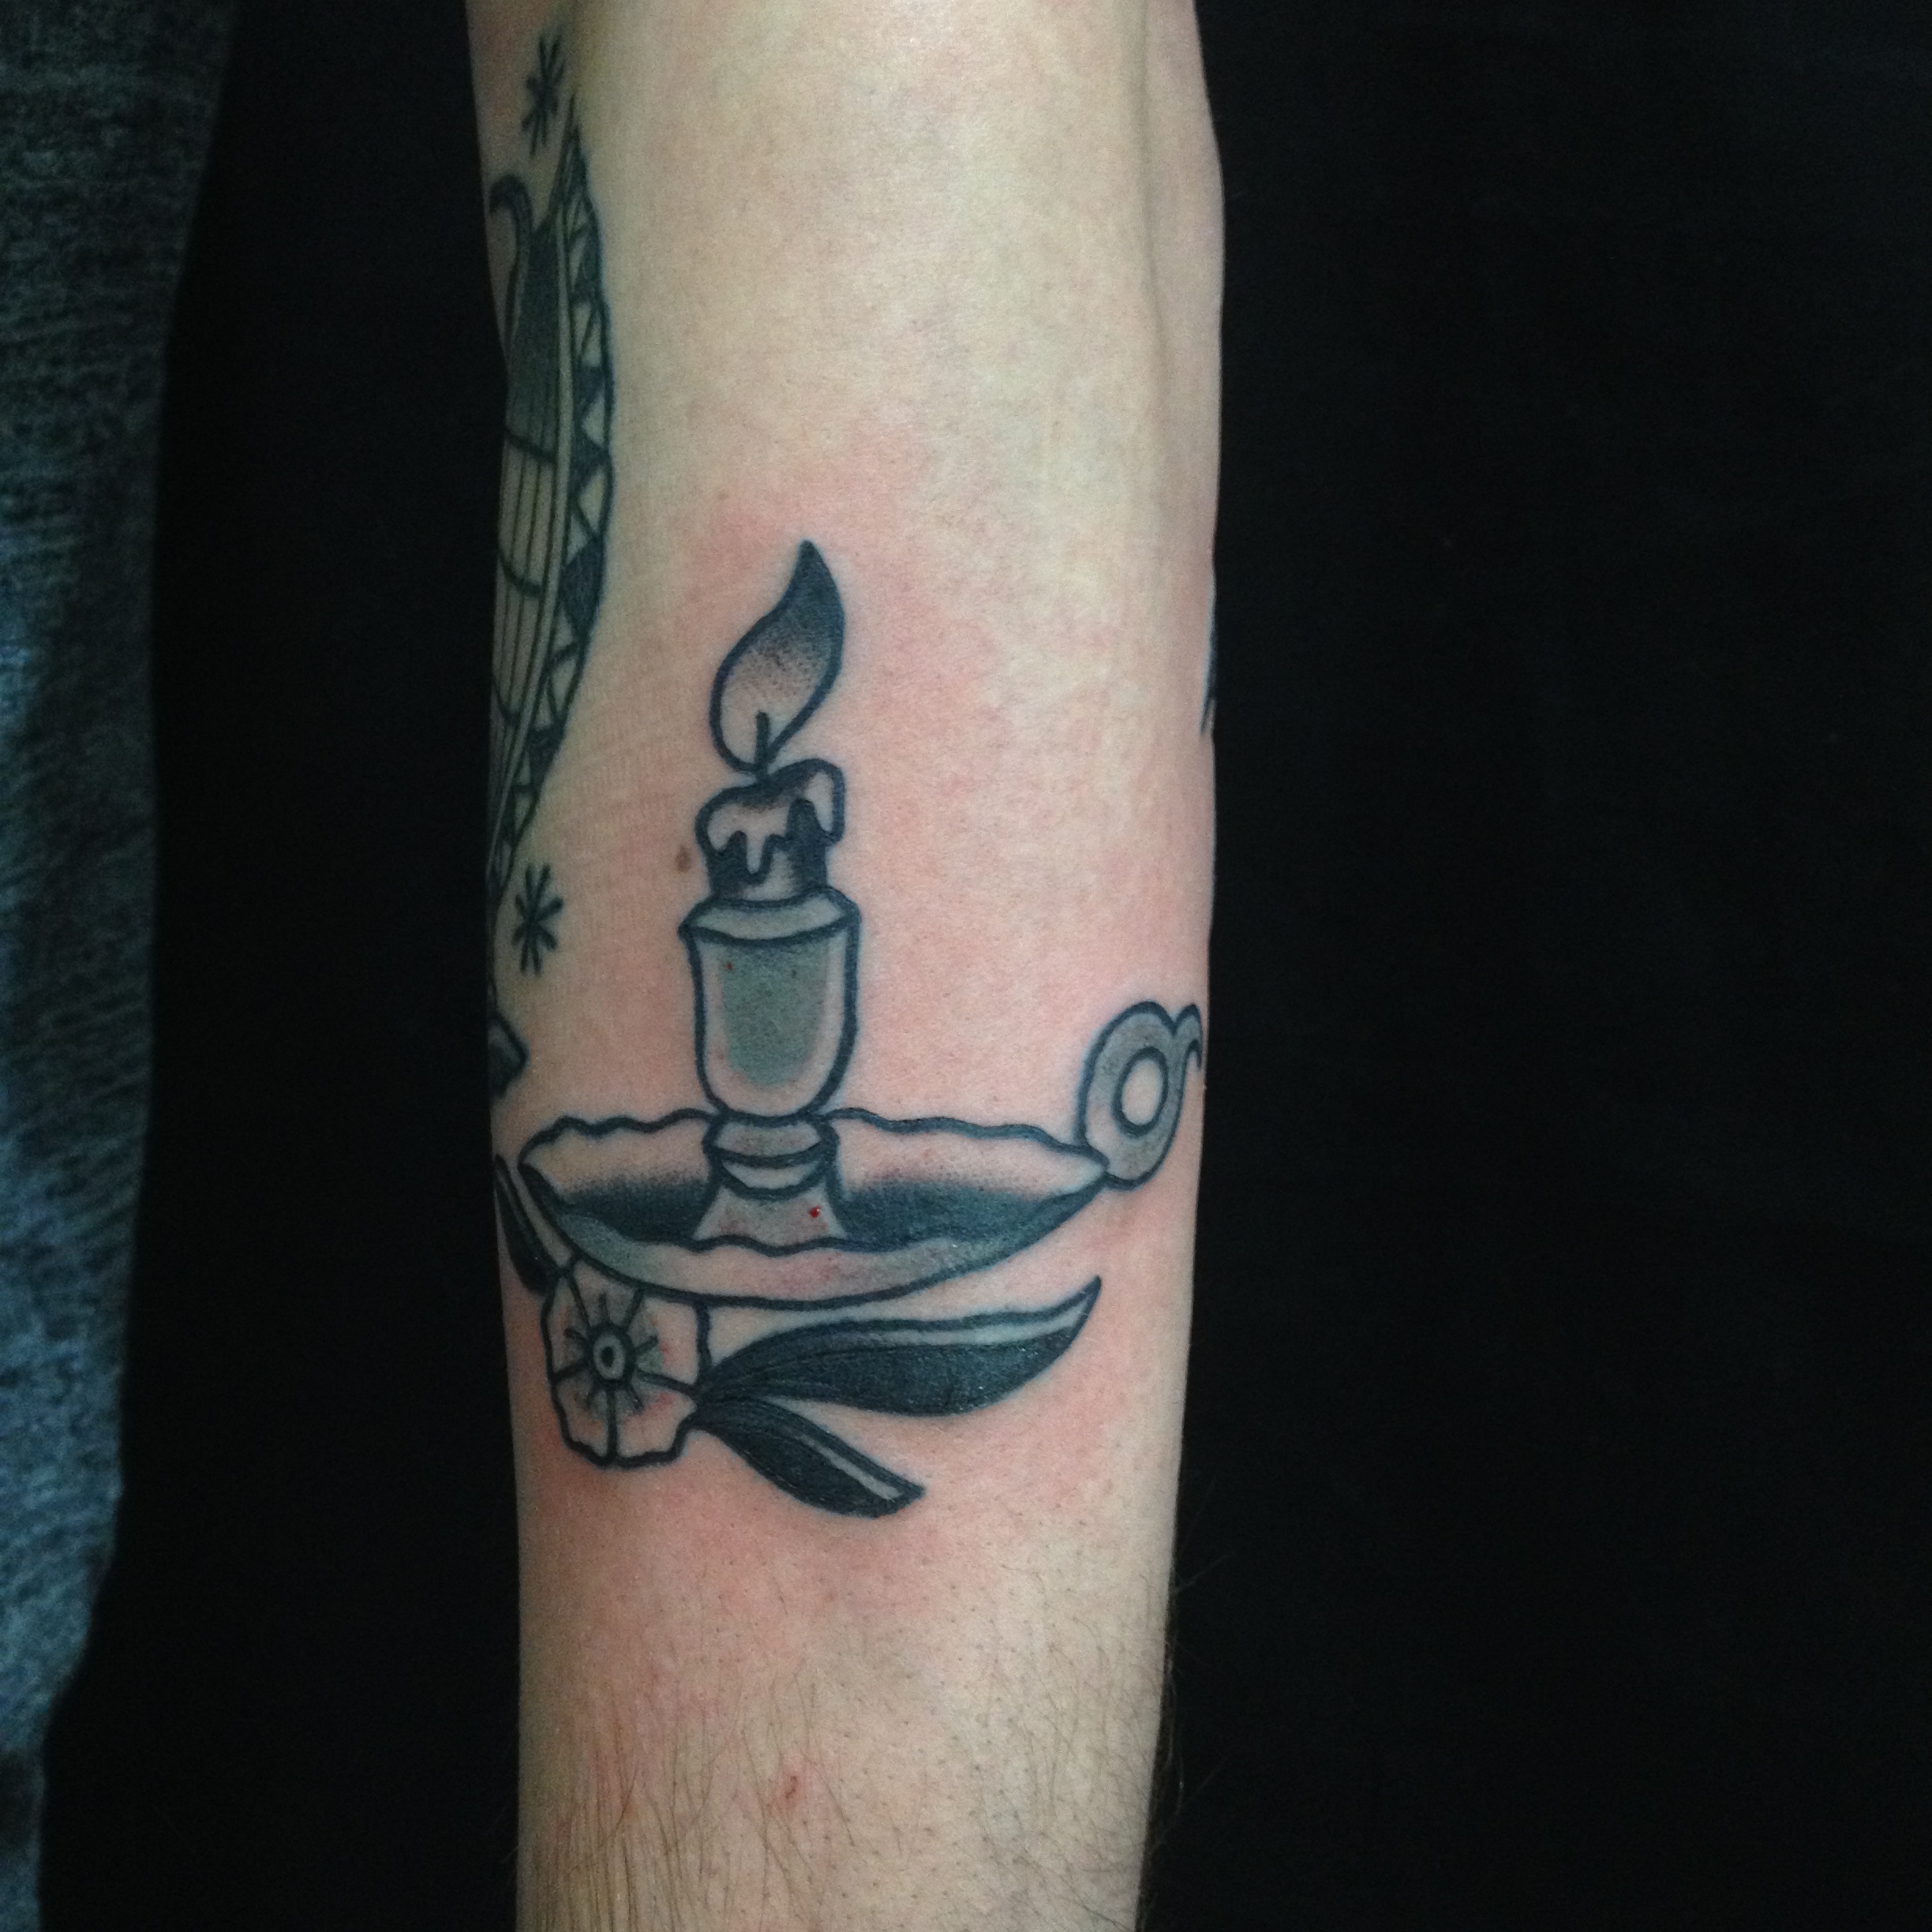 Black Ink Burning Candle In Holder Tattoo On Arm